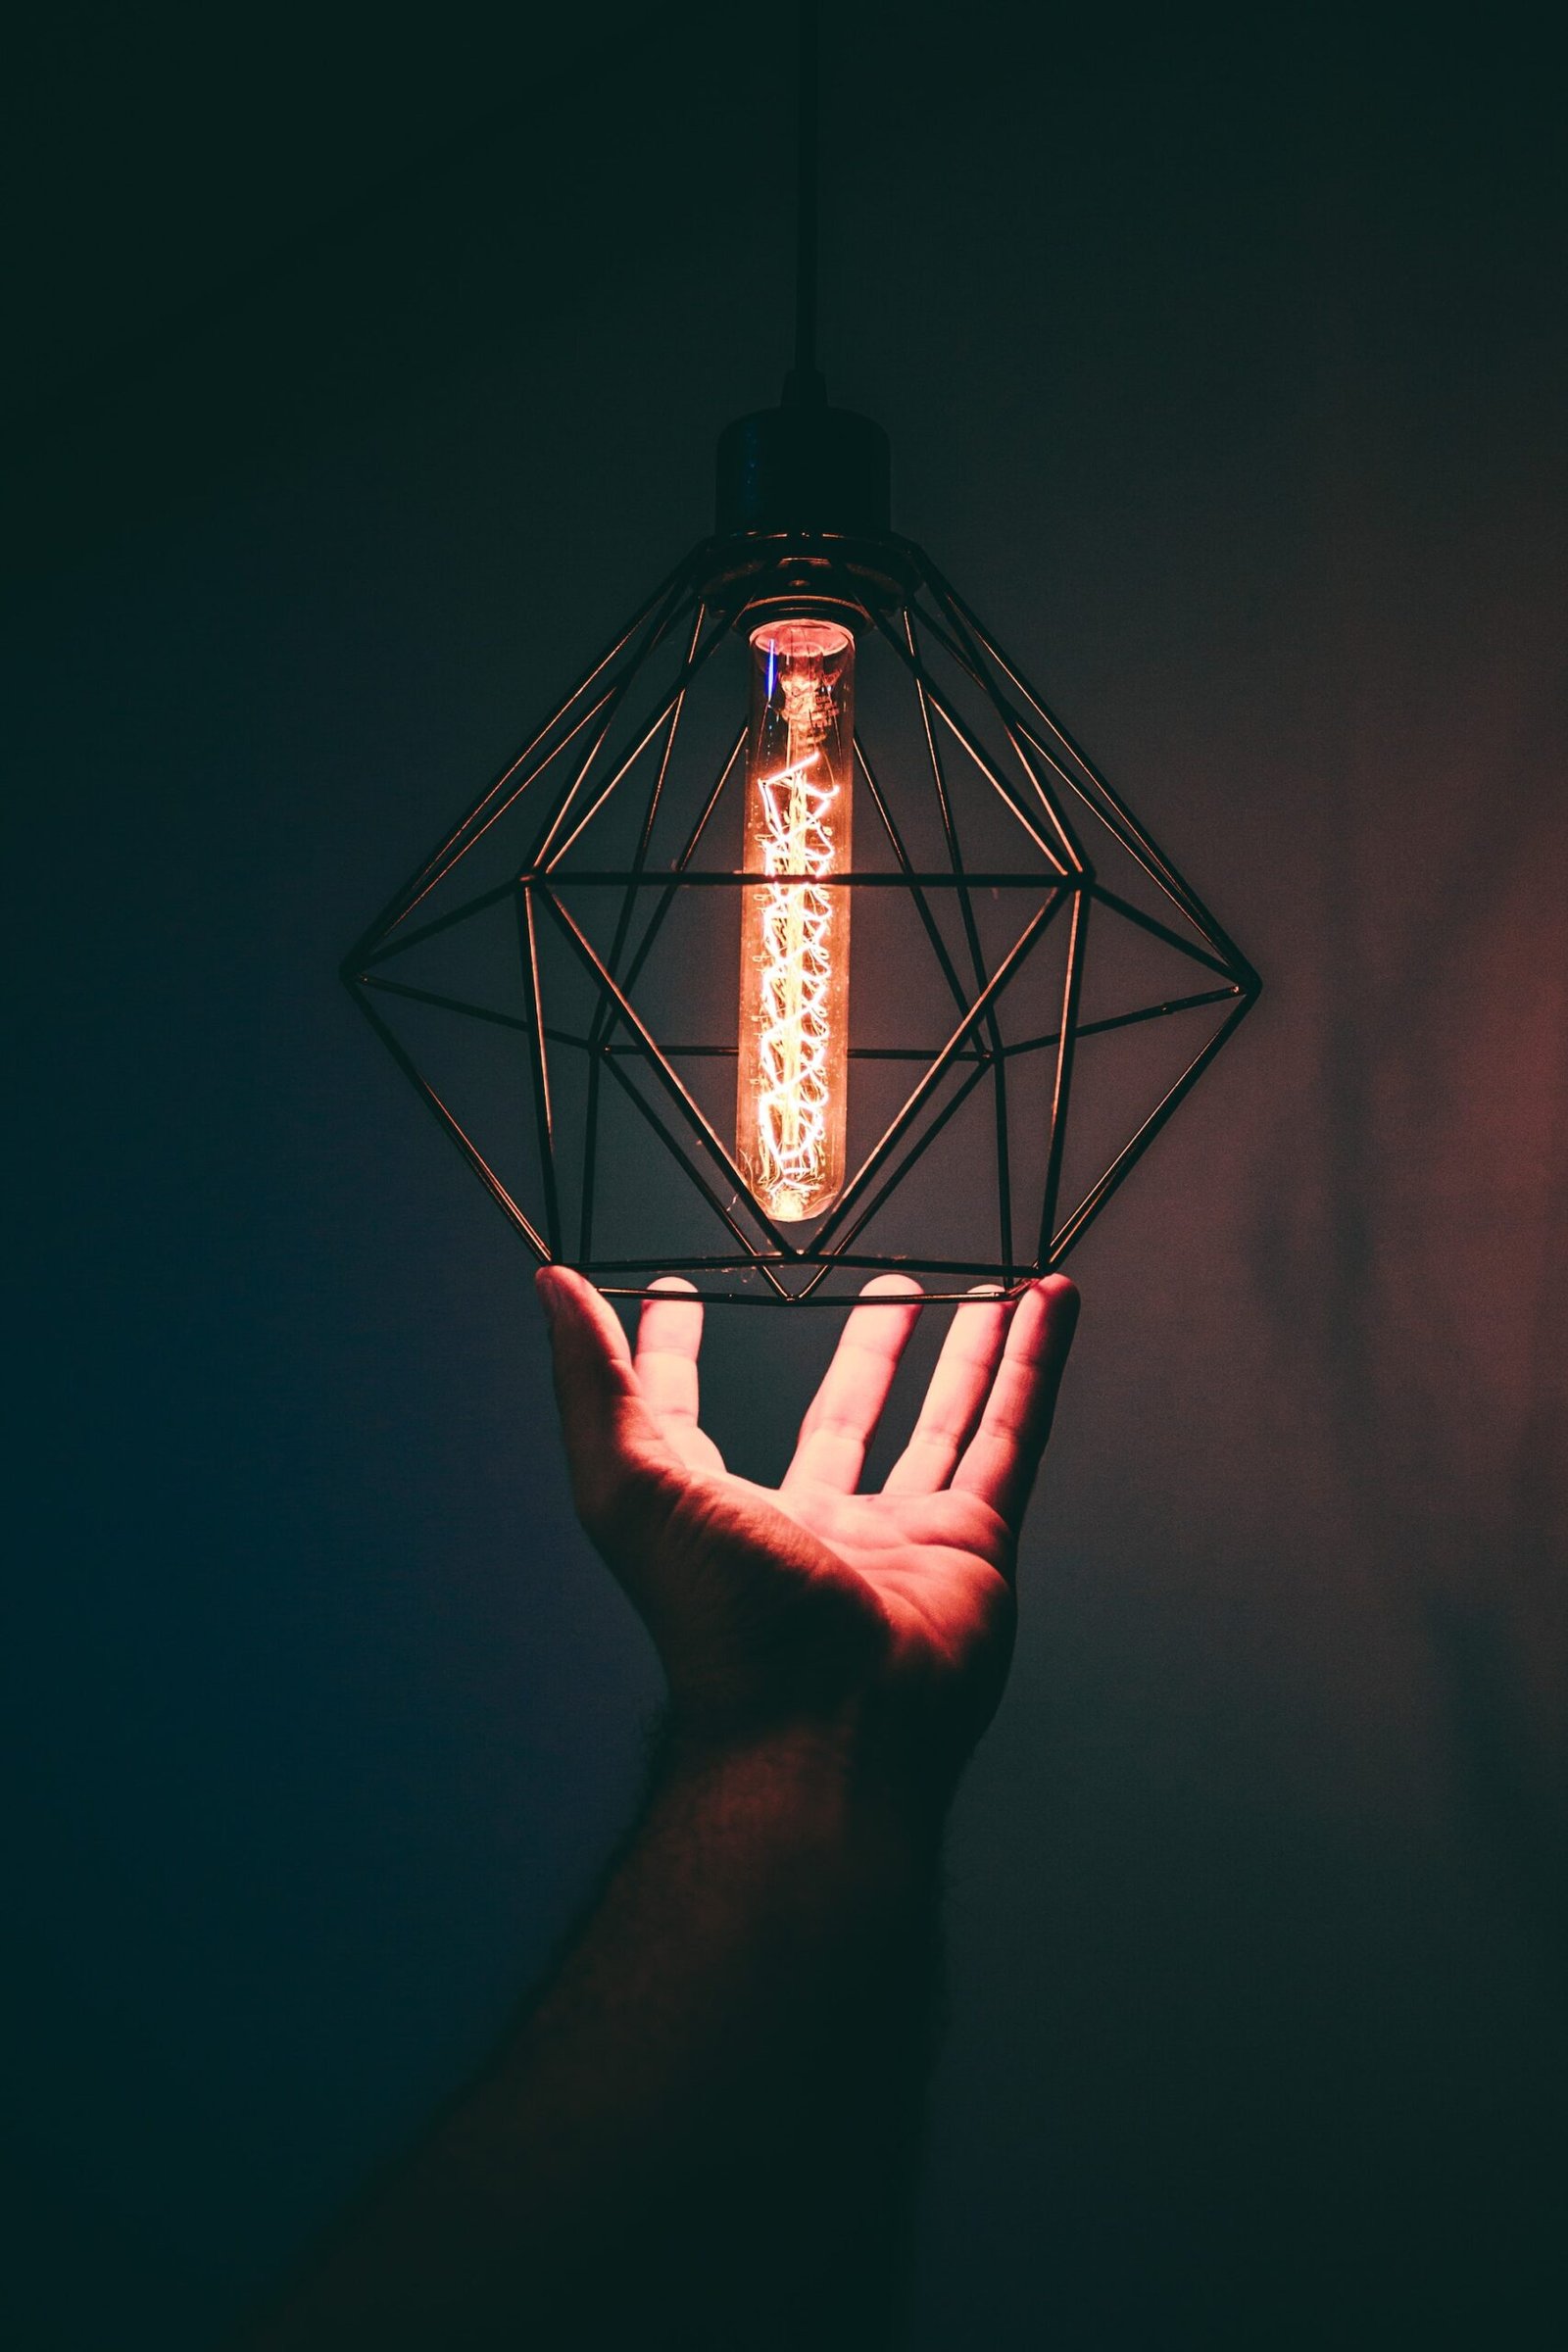 Hand steadying light with filament globe